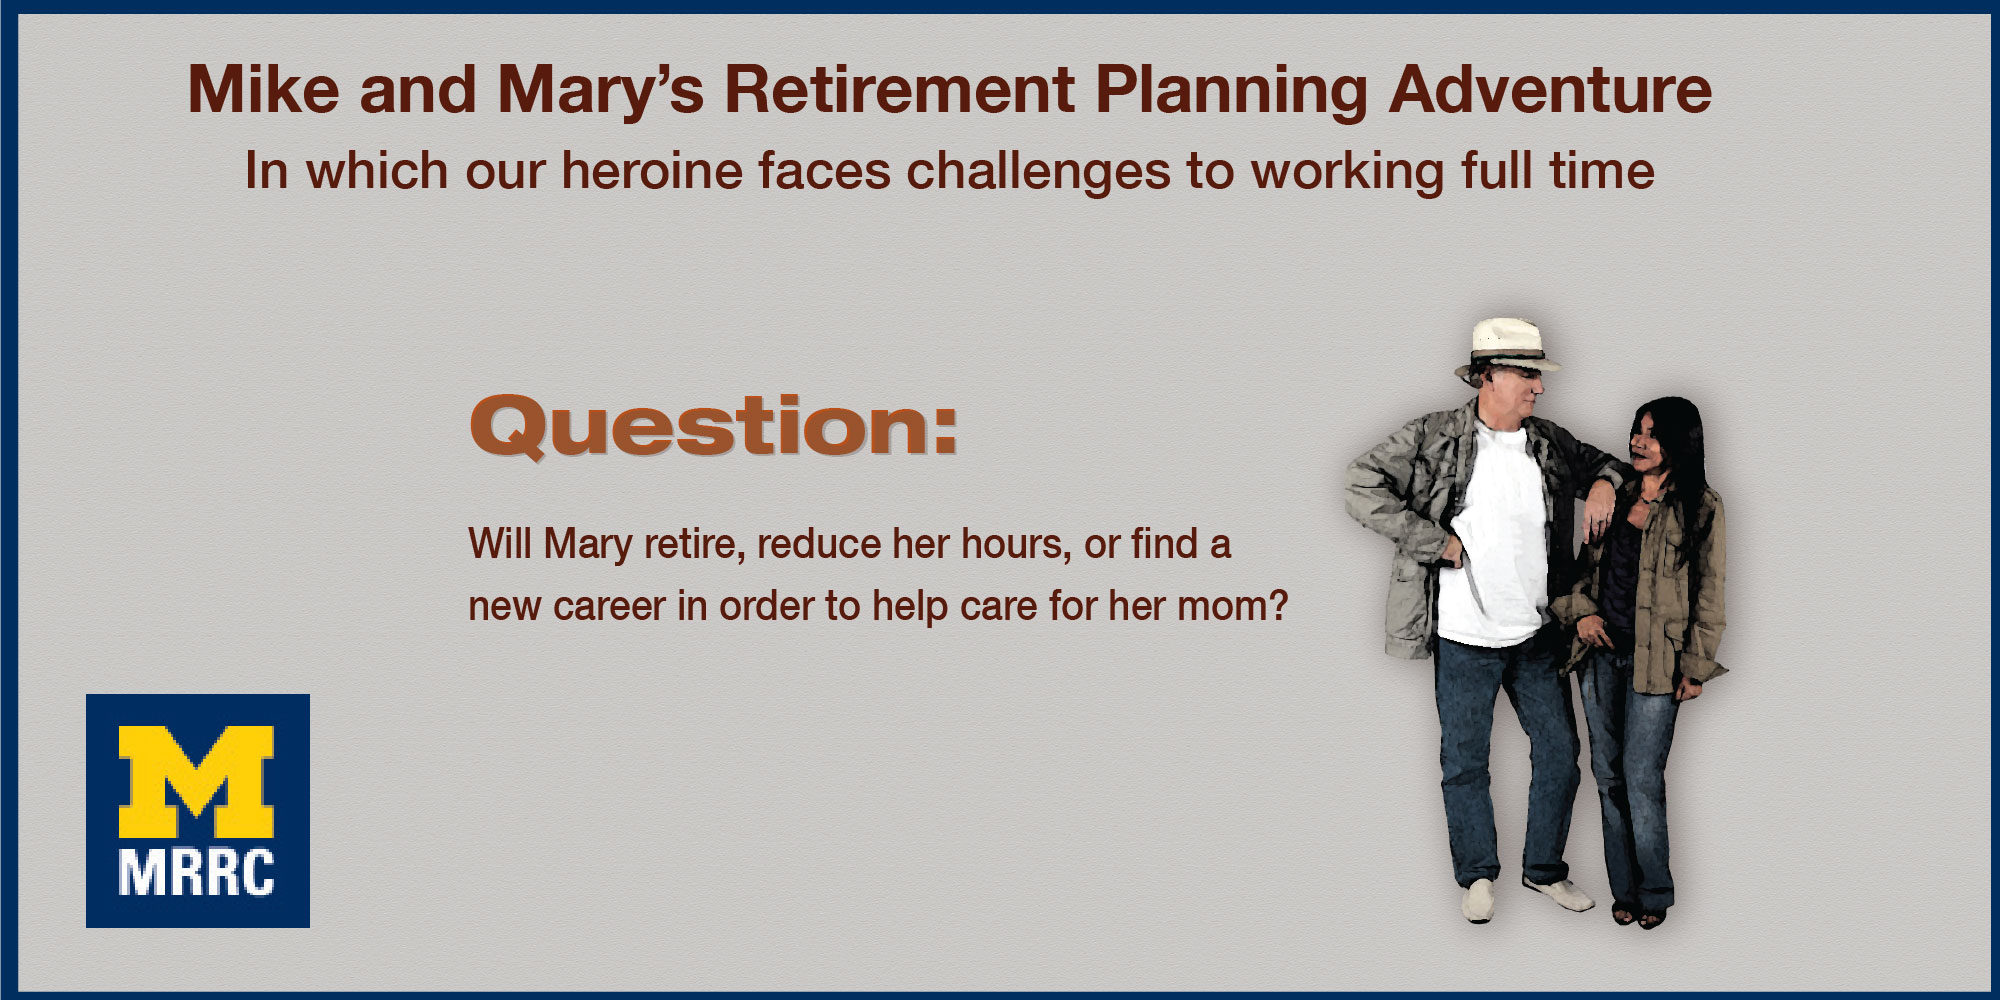 Question: Will Mary retire, reduce her hours, or find a new career in order to help care for her mom?